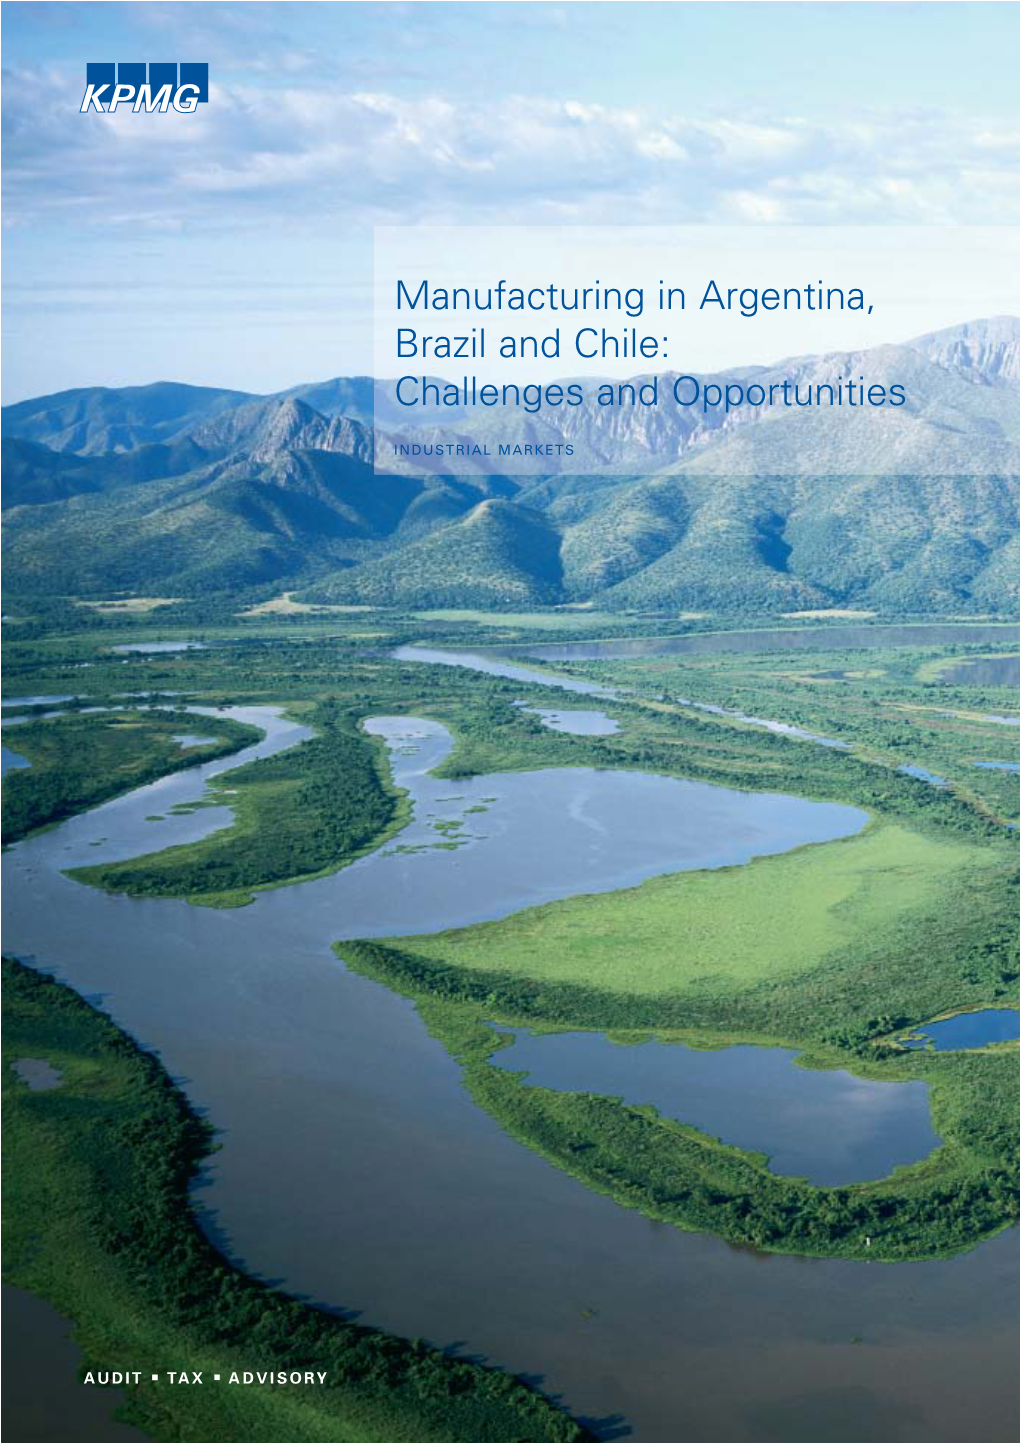 Manufacturing in Argentina, Brazil and Chile: Challenges and Opportunities